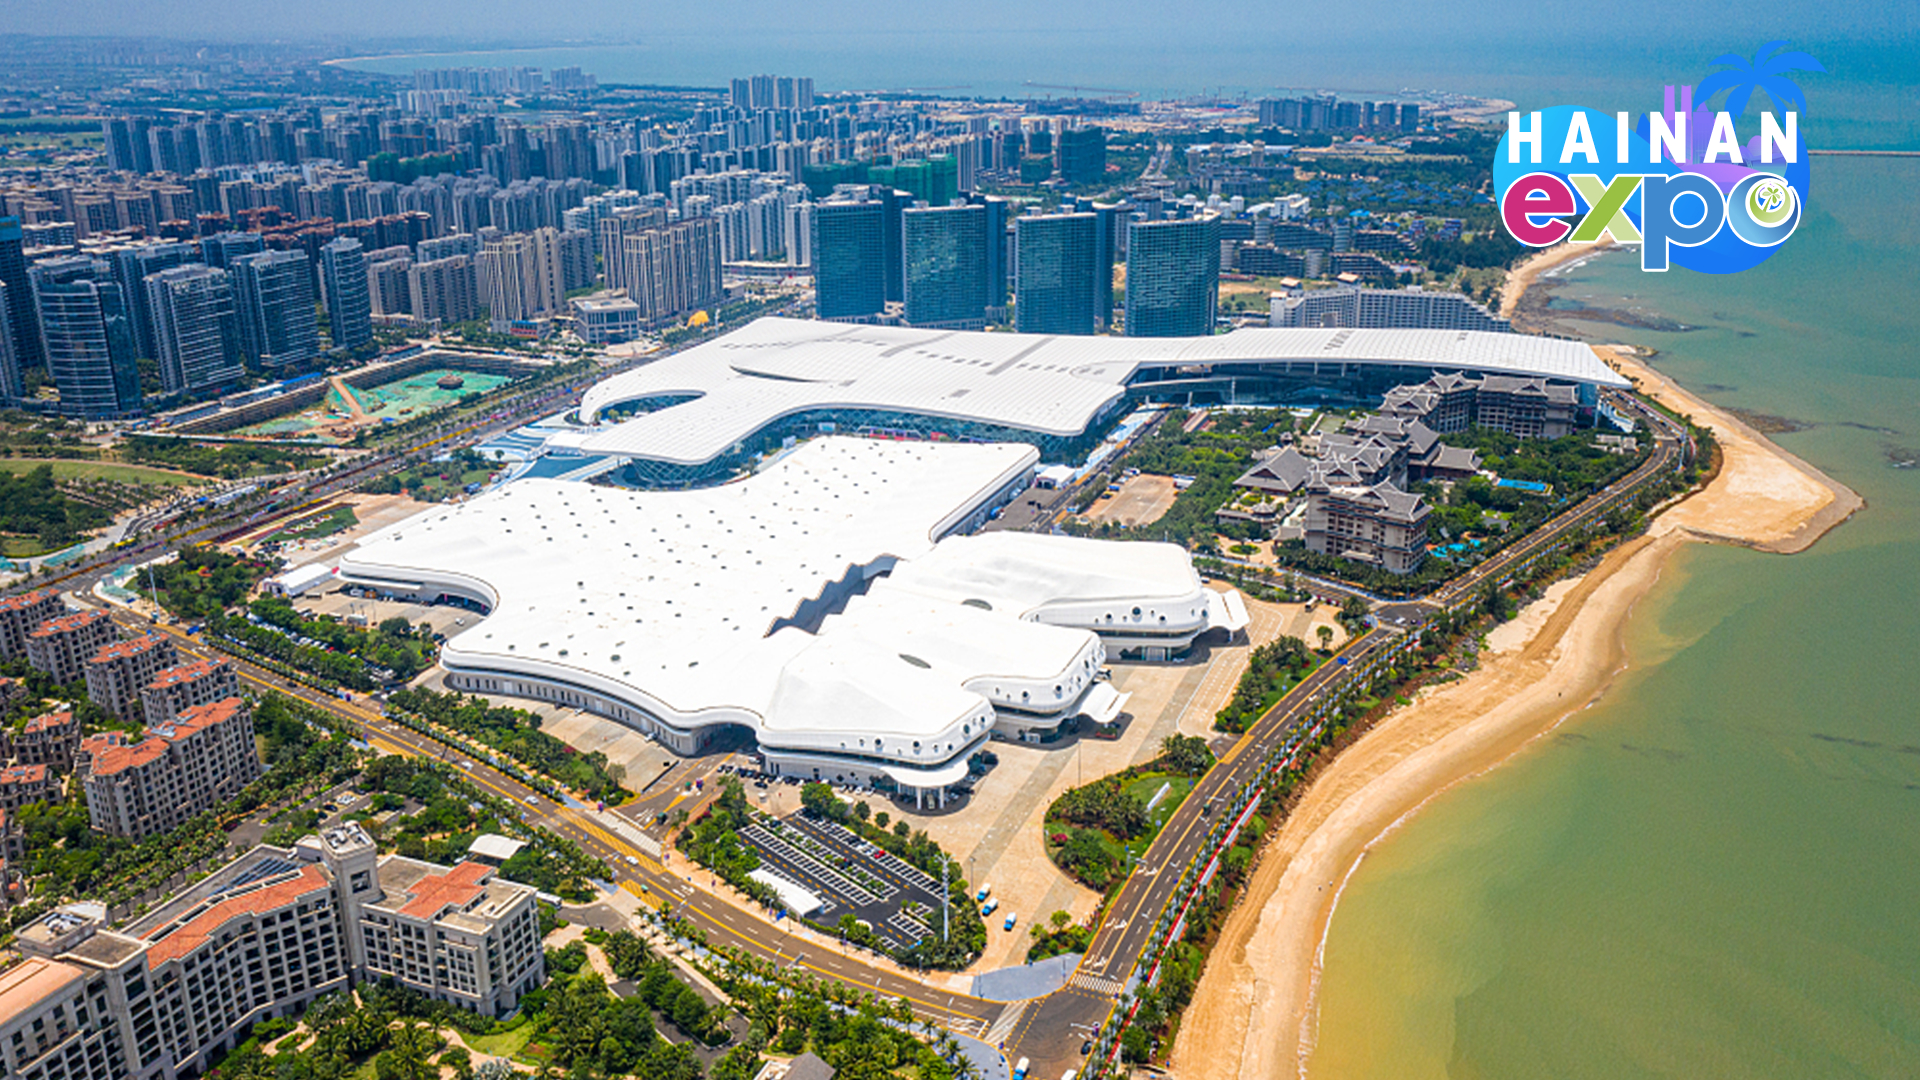 Live: Views of Hainan International Convention and Exhibition Center